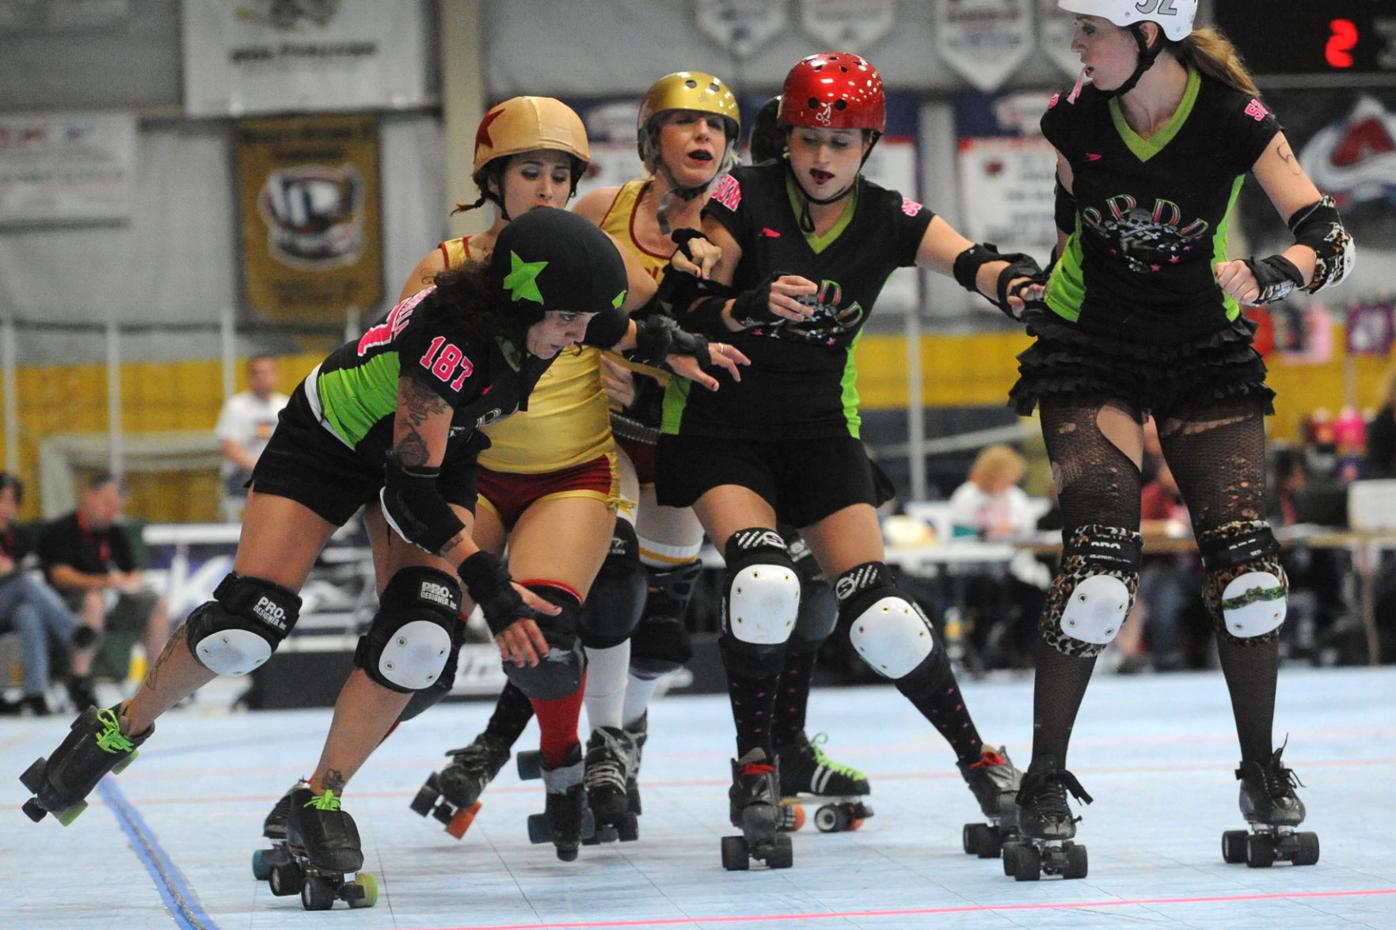 Roller derby resurgence: How America's forgotten pastime remains